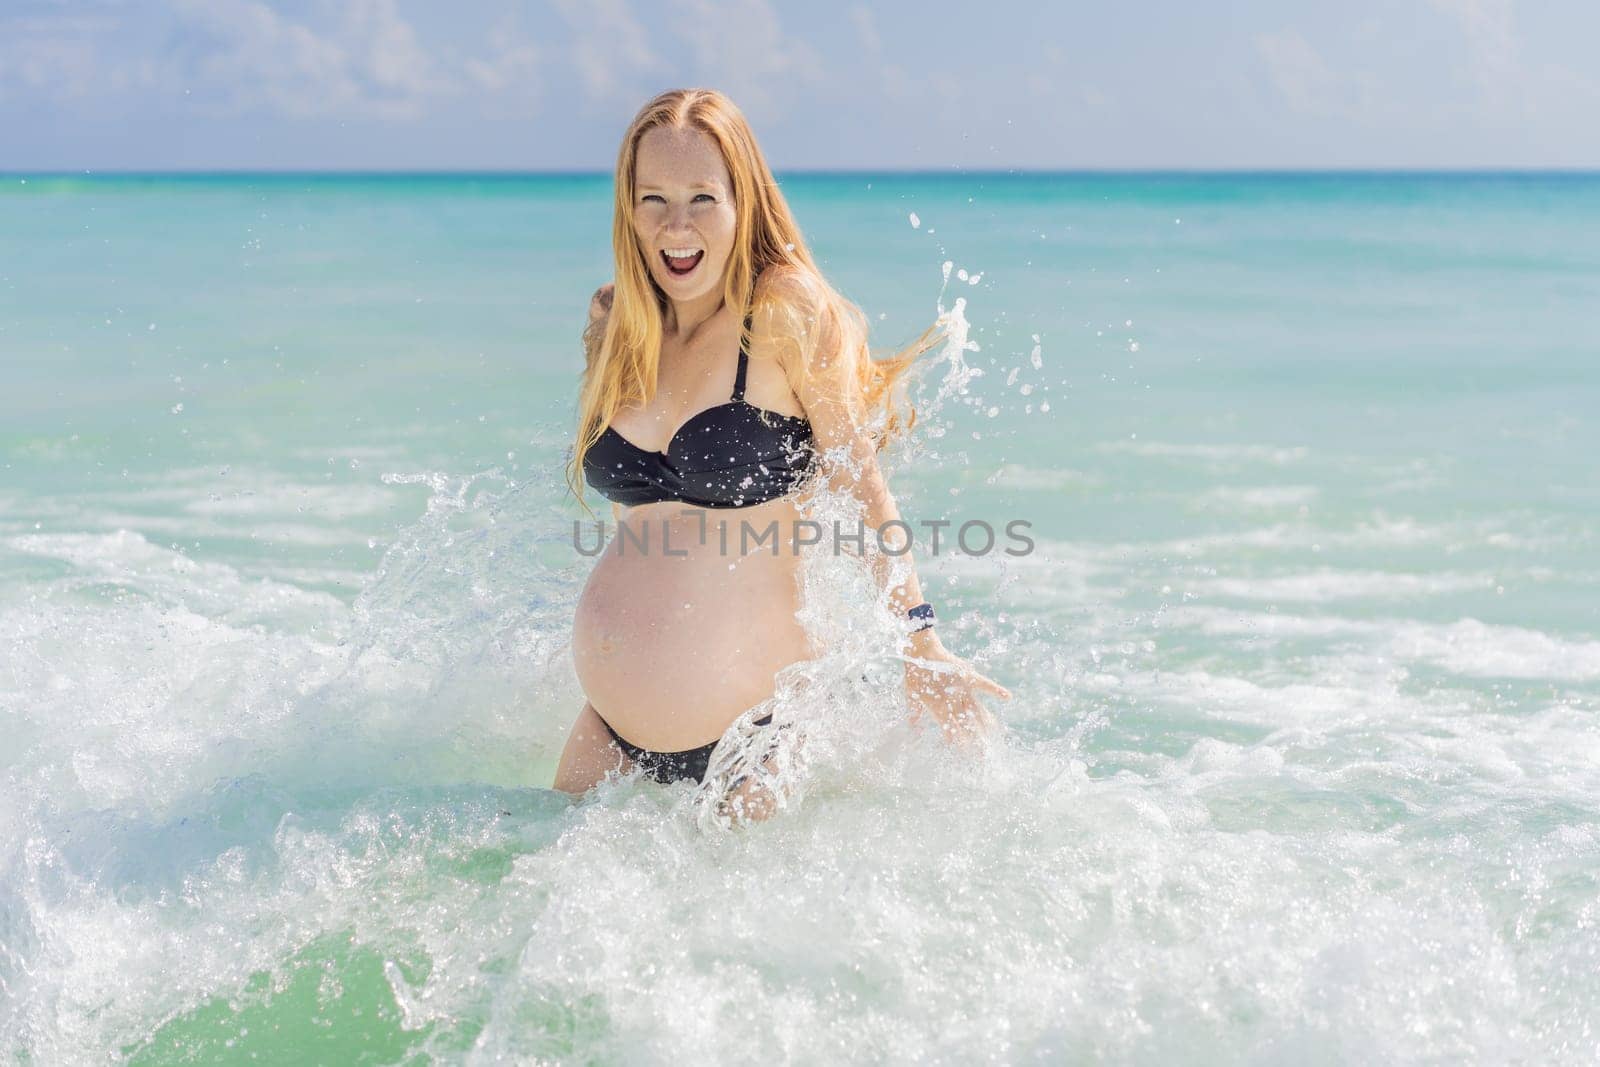 In the idyllic embrace of the Caribbean Sea, a pregnant woman finds bliss, savoring the warmth and serenity of the tropical waters during her pregnancy by galitskaya